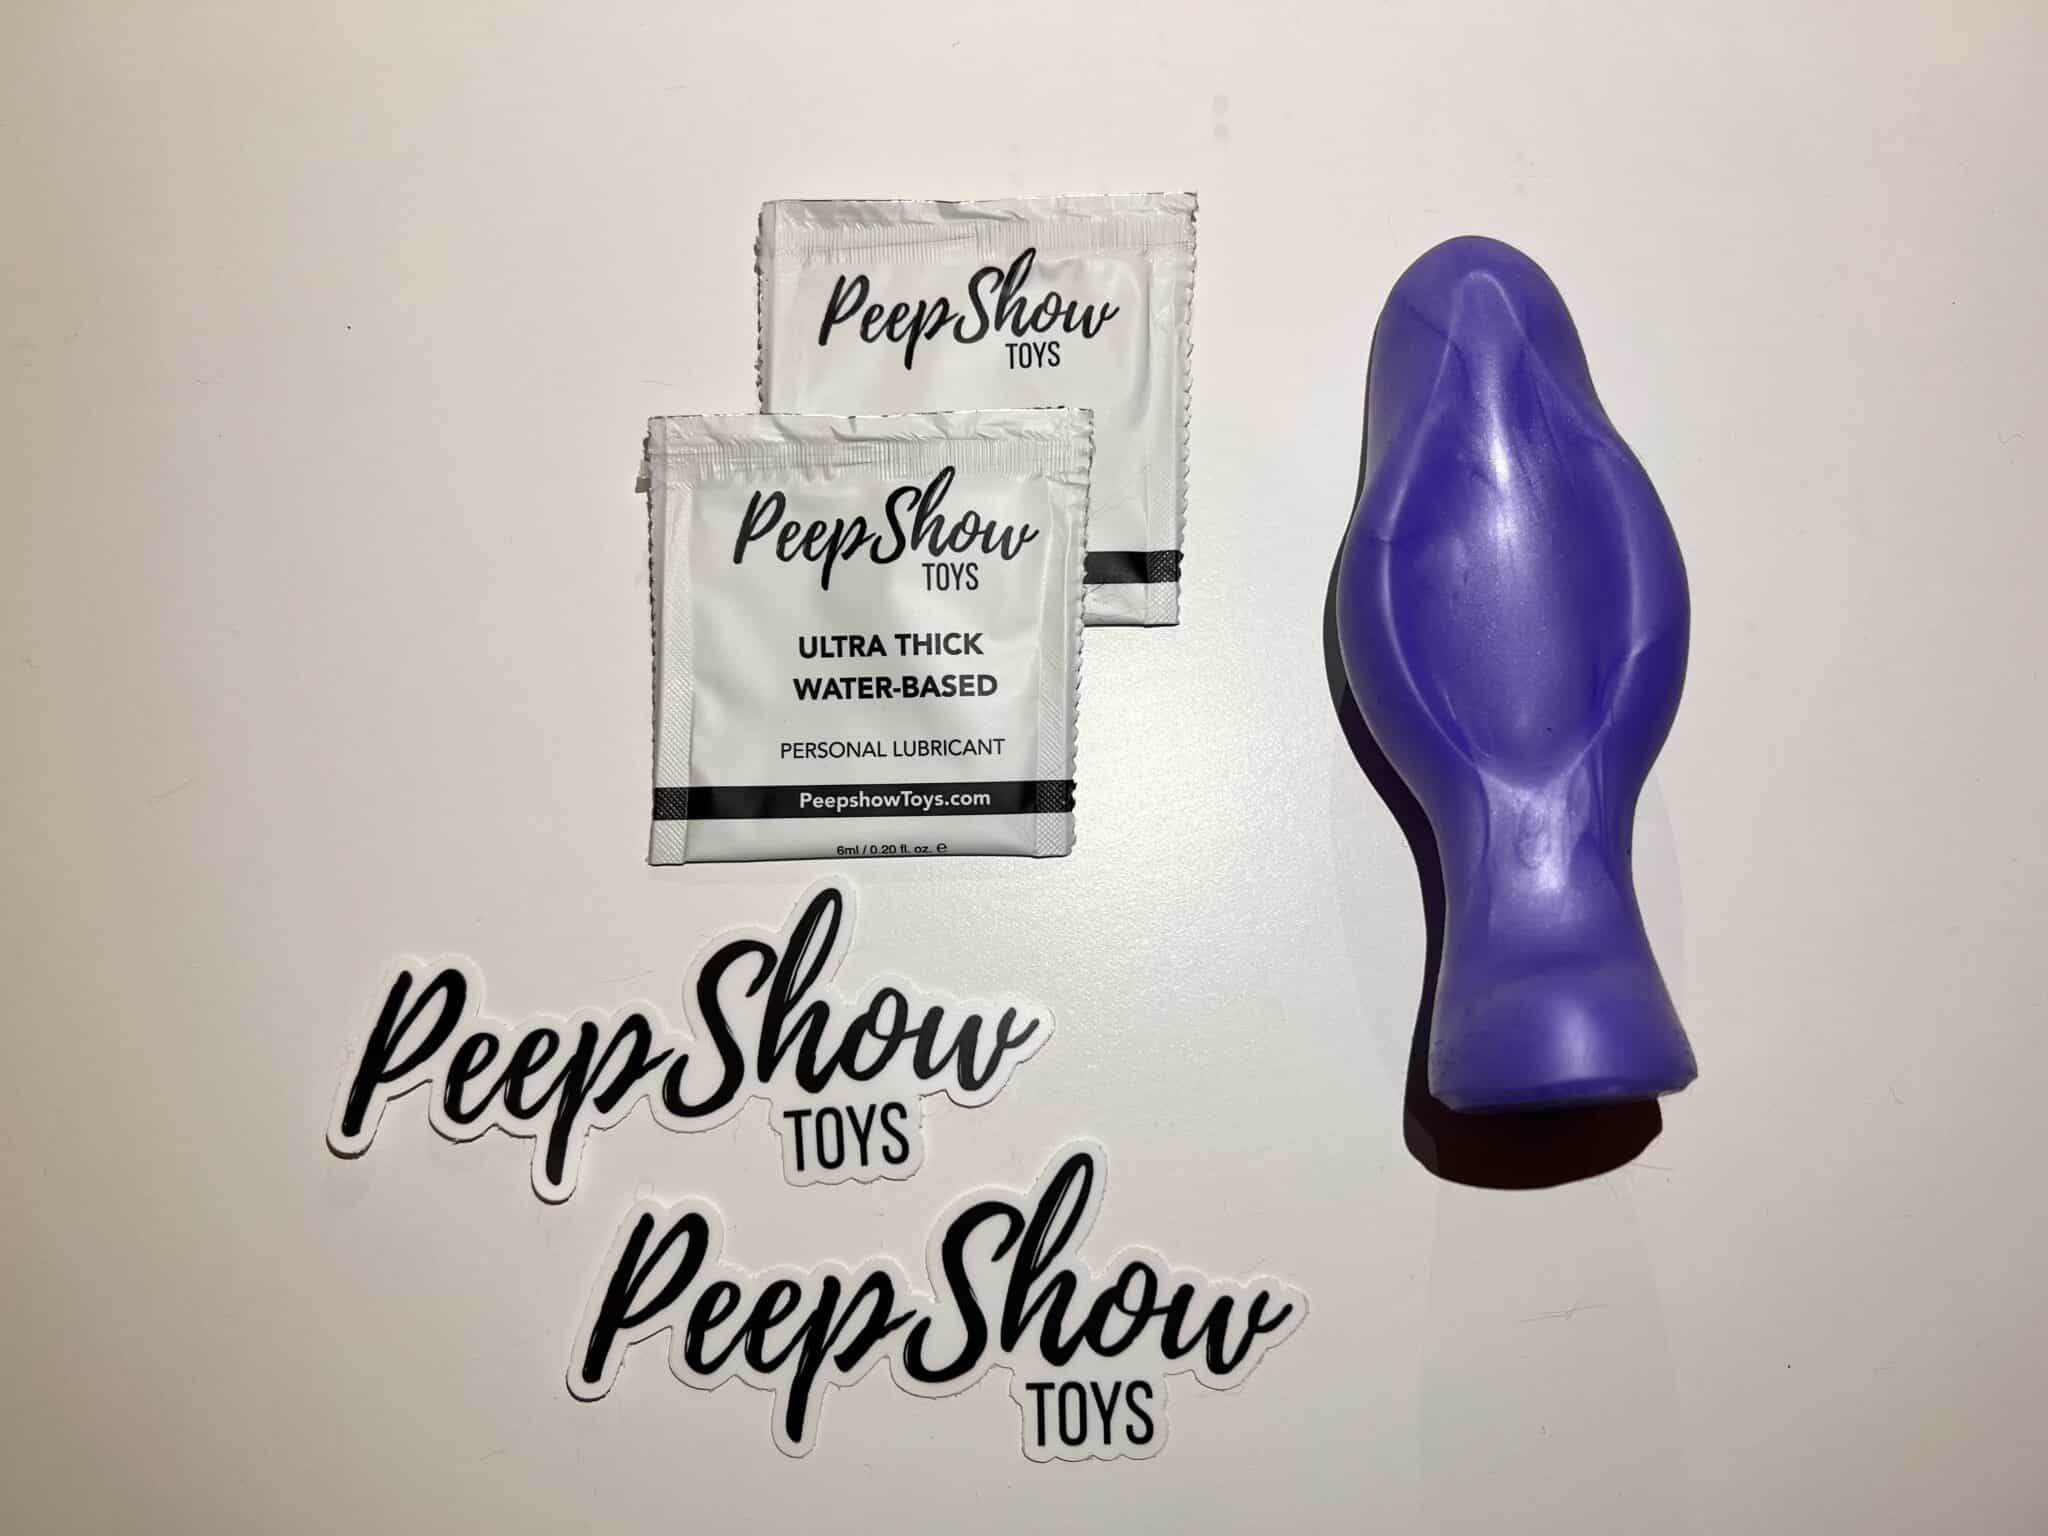 SquarePegToys G Squeeze Vaginal Plug Cost of the SquarePegToys G Squeeze Vaginal Plug